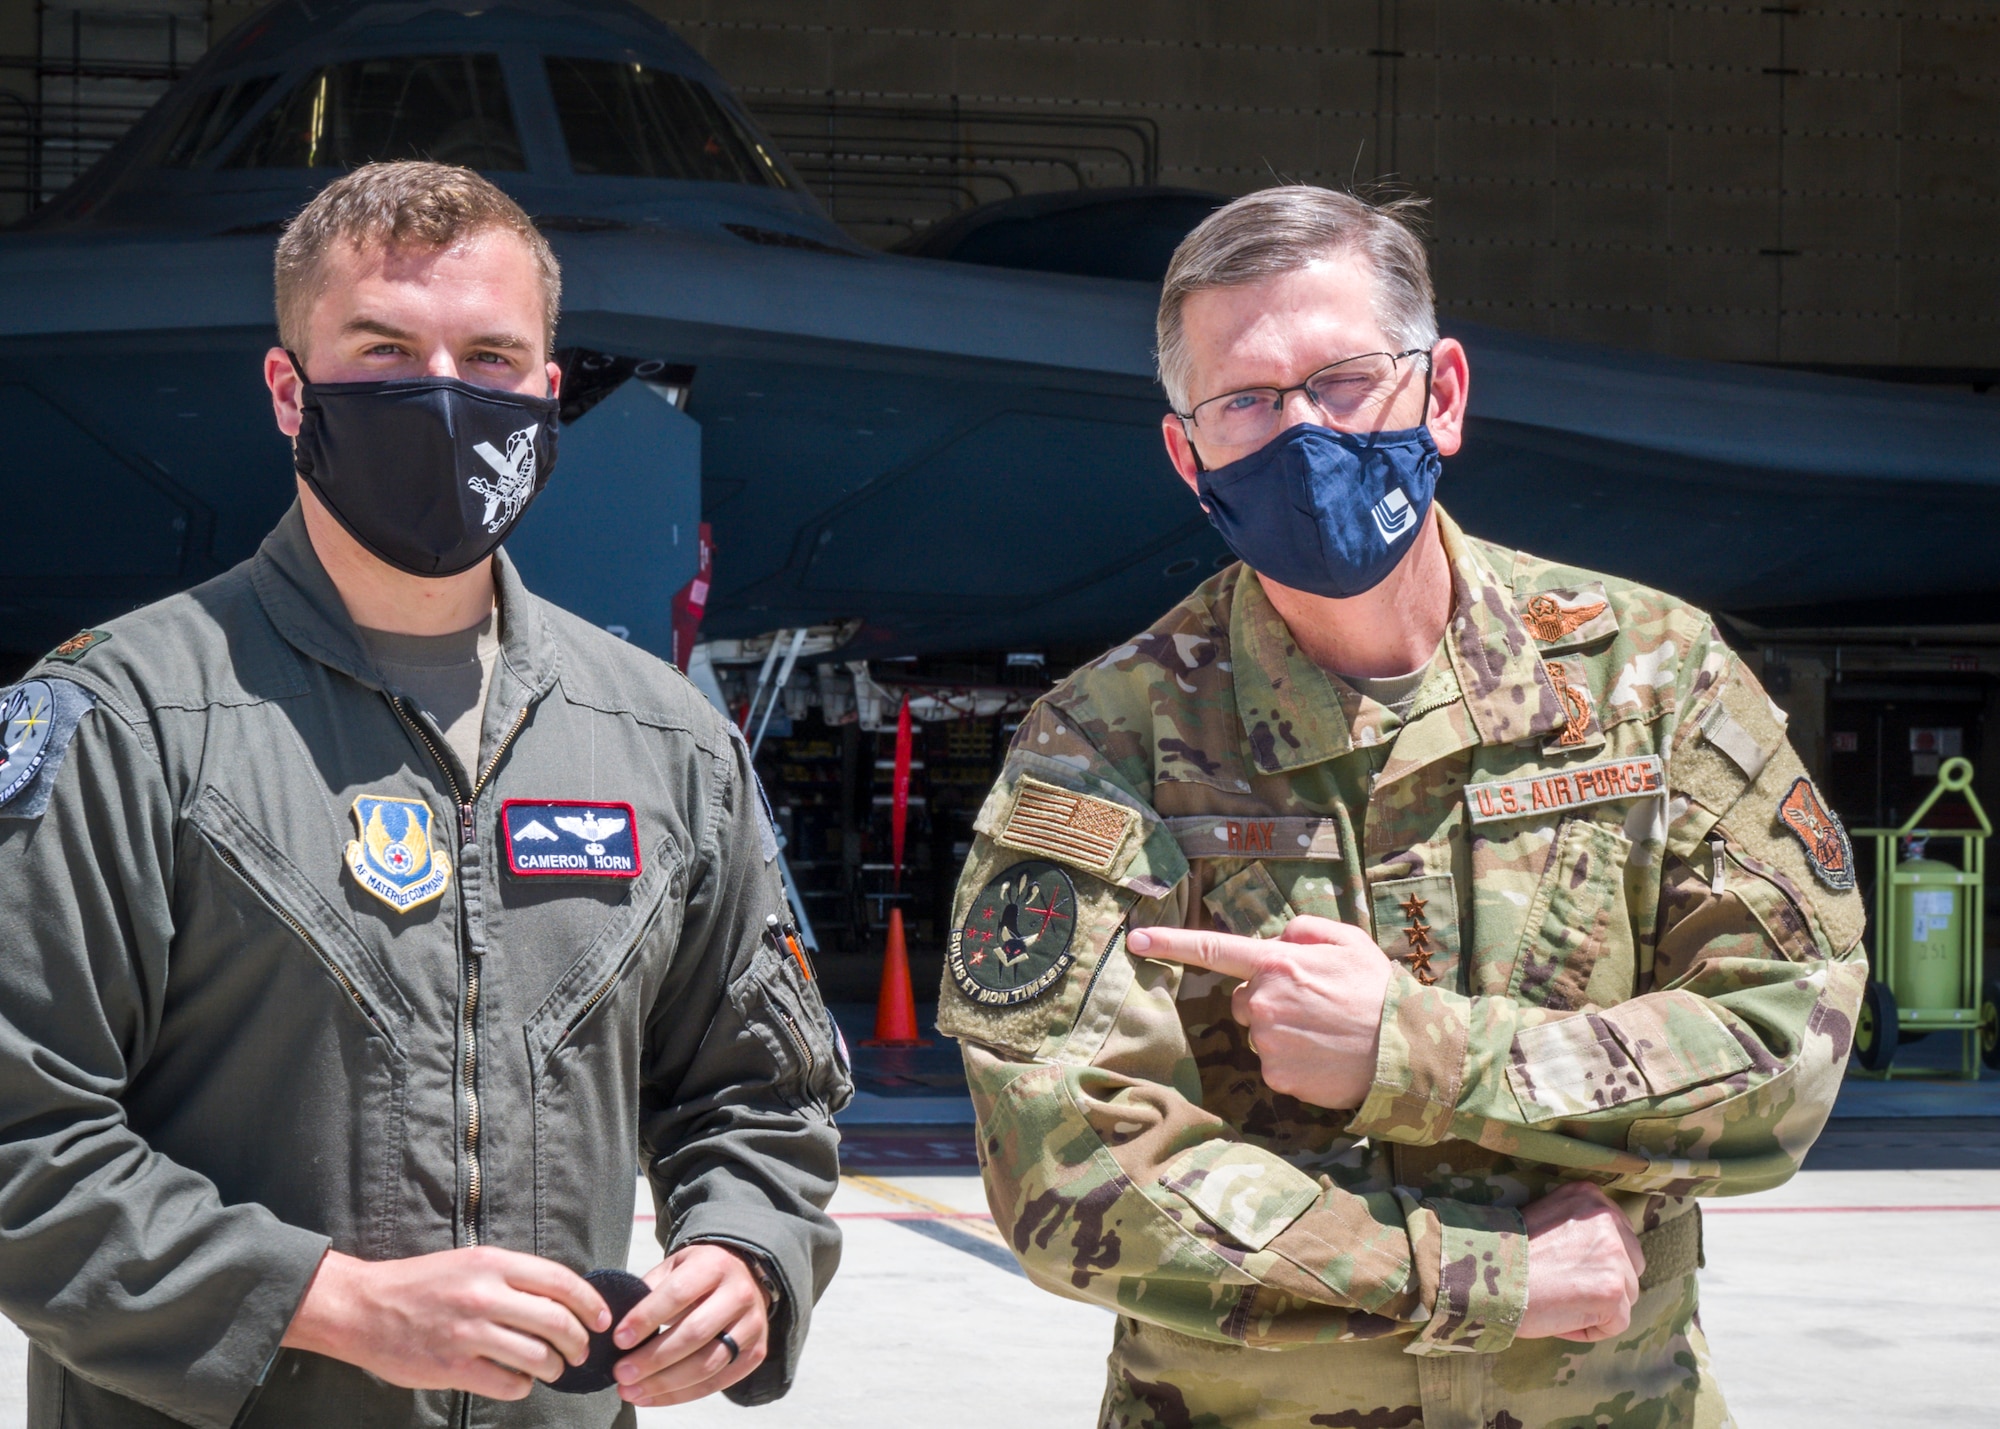 Maj. Cameron Horn, 419th Flight Test commander, presents Gen. Timothy Ray, Air Force Global Strike Command commander, with a B-2 test program morale patch during his visit to Edwards Air Force Base, California, May 5. The B-2 fleets continued technological advancement enables expanded strike capabilities while ensuring the aircraft can keep pace with evolving threat levels. (Air Force photo by Giancarlo Casem)